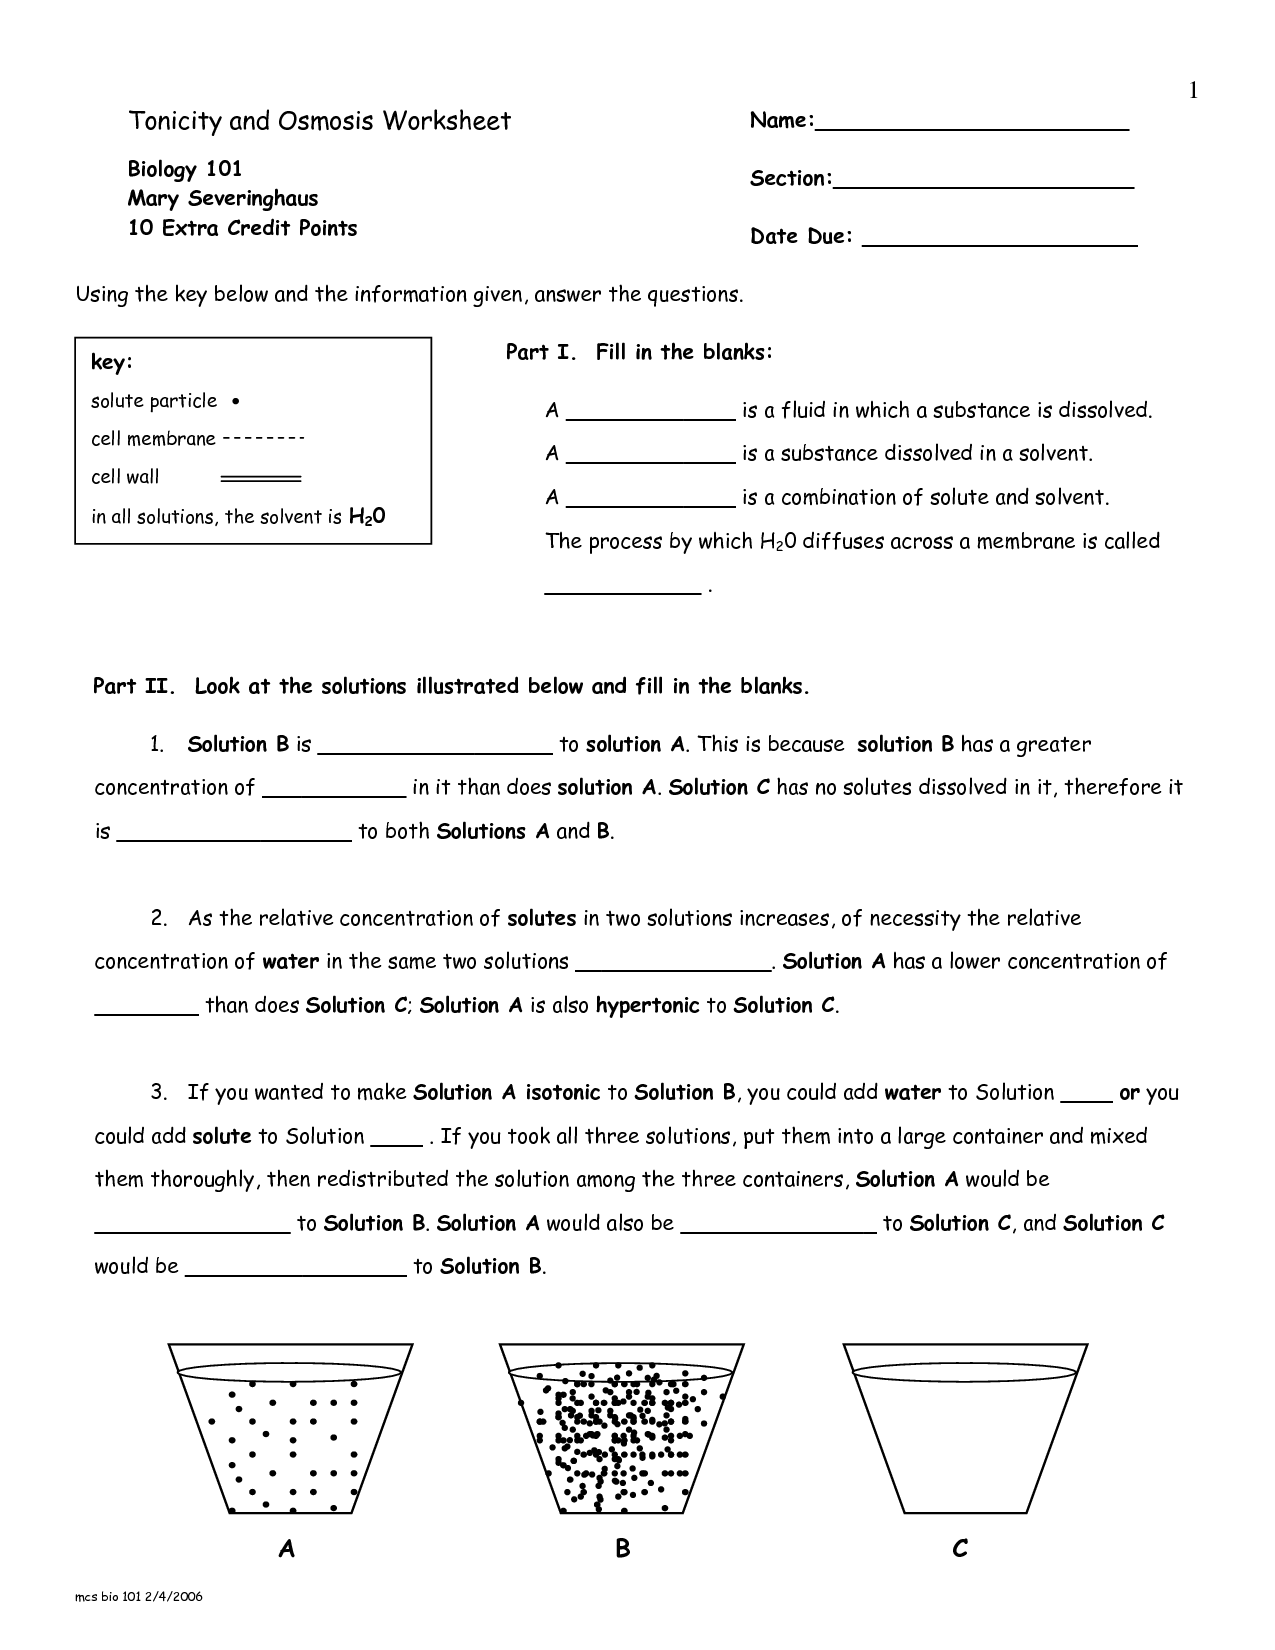 13 Best Images of Diffusion Worksheet Key  Osmosis and Tonicity Worksheet Answer Key, Diffusion 